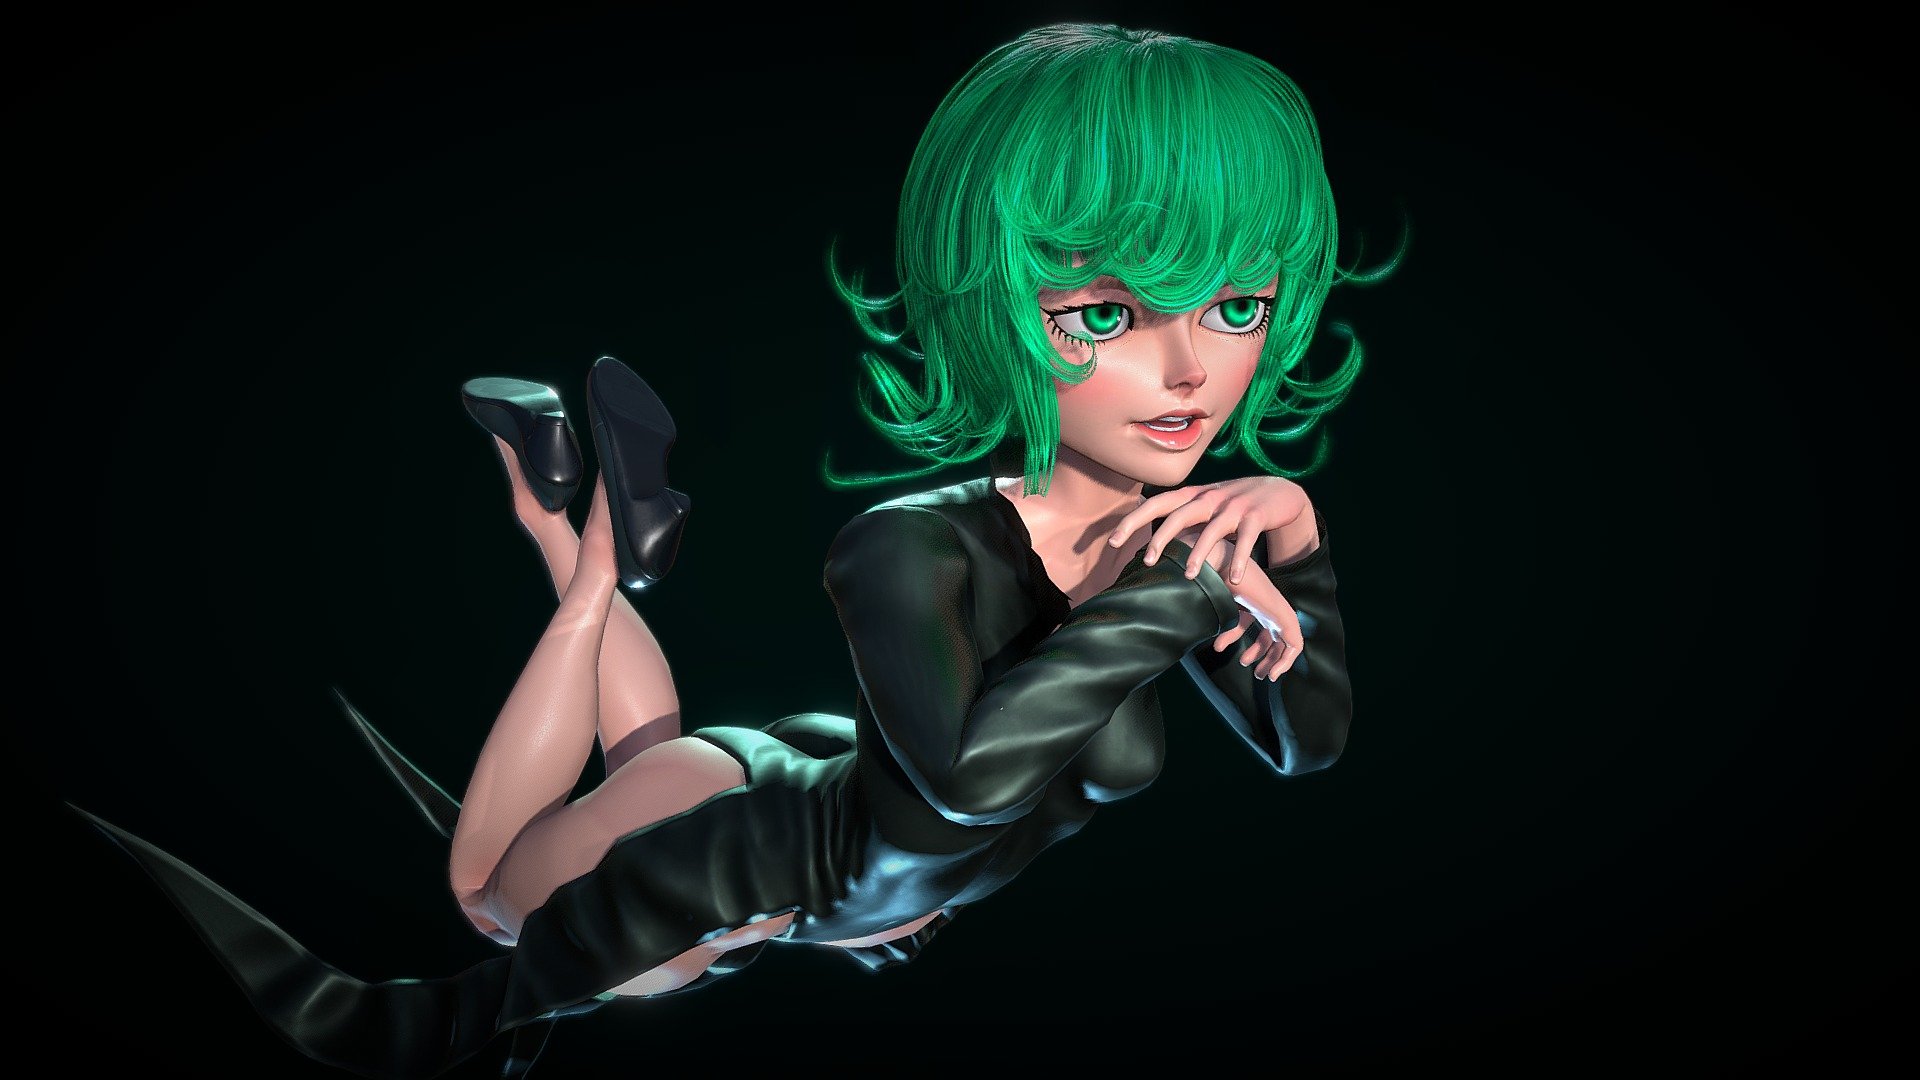 Pretty much the same model that I uploaded earlier, just another pose.
Previous variant of this model - https://sketchfab.com/3d-models/tatsumaki-0322877c8bb7419a9e5c37073943f90d - Tatsumaki 2 - 3D model by CGnewbie 3d model